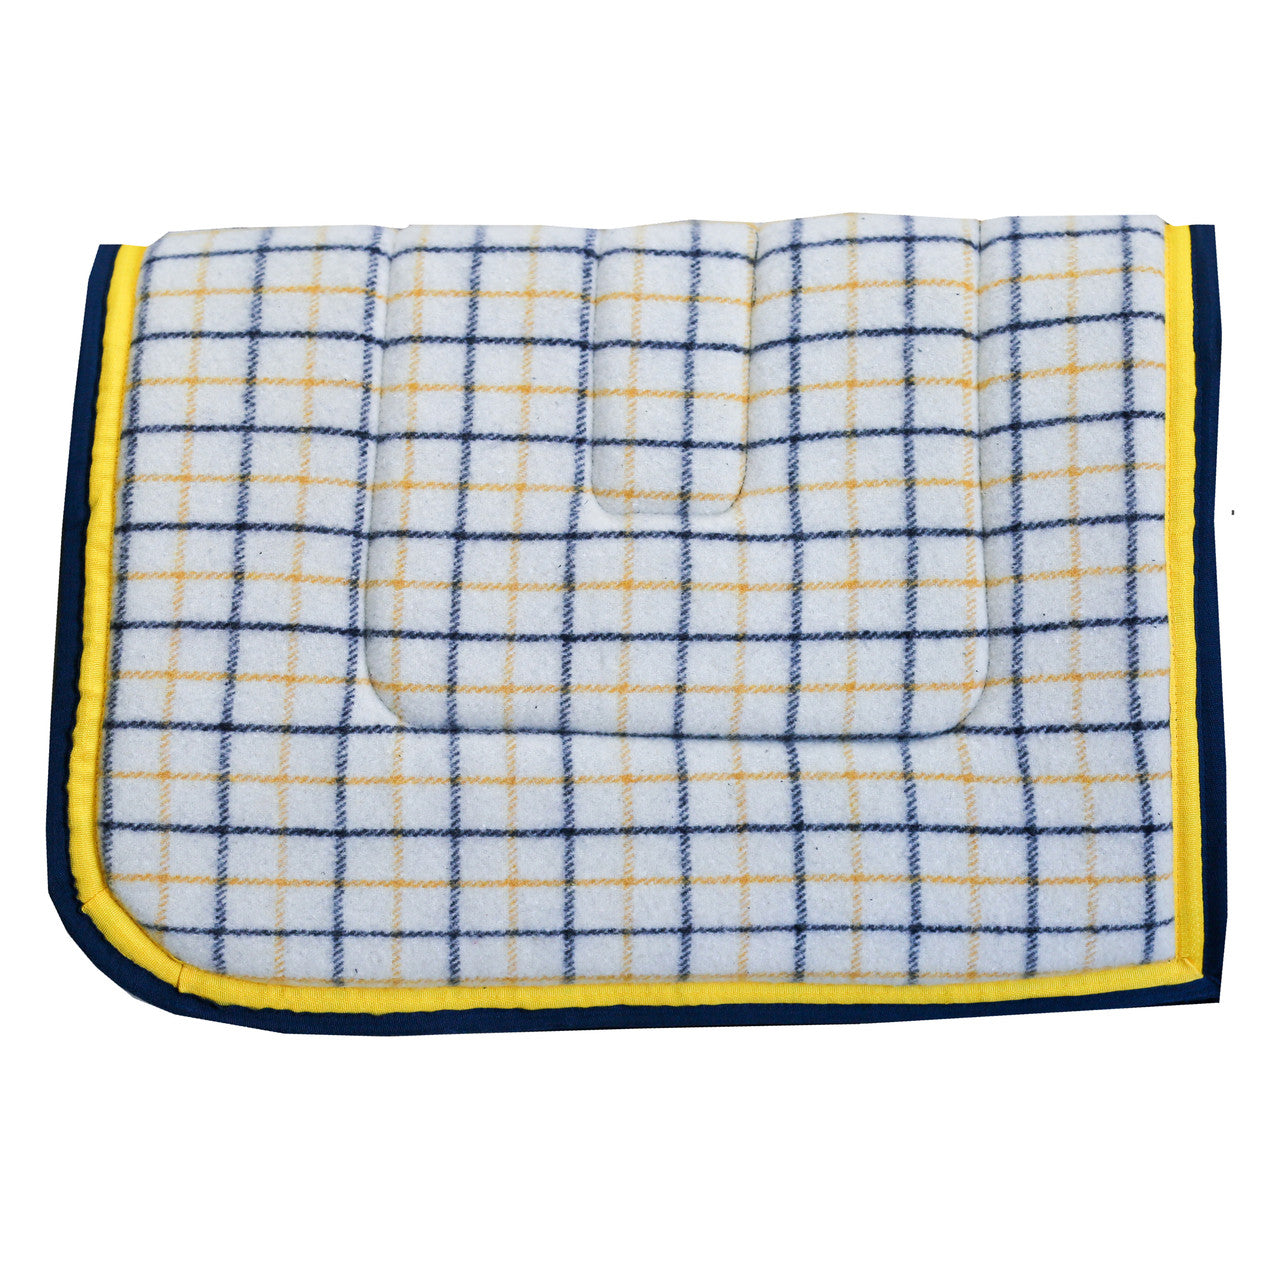 Kersey Wool Saddle Pad - Cream with Navy & Gold Check